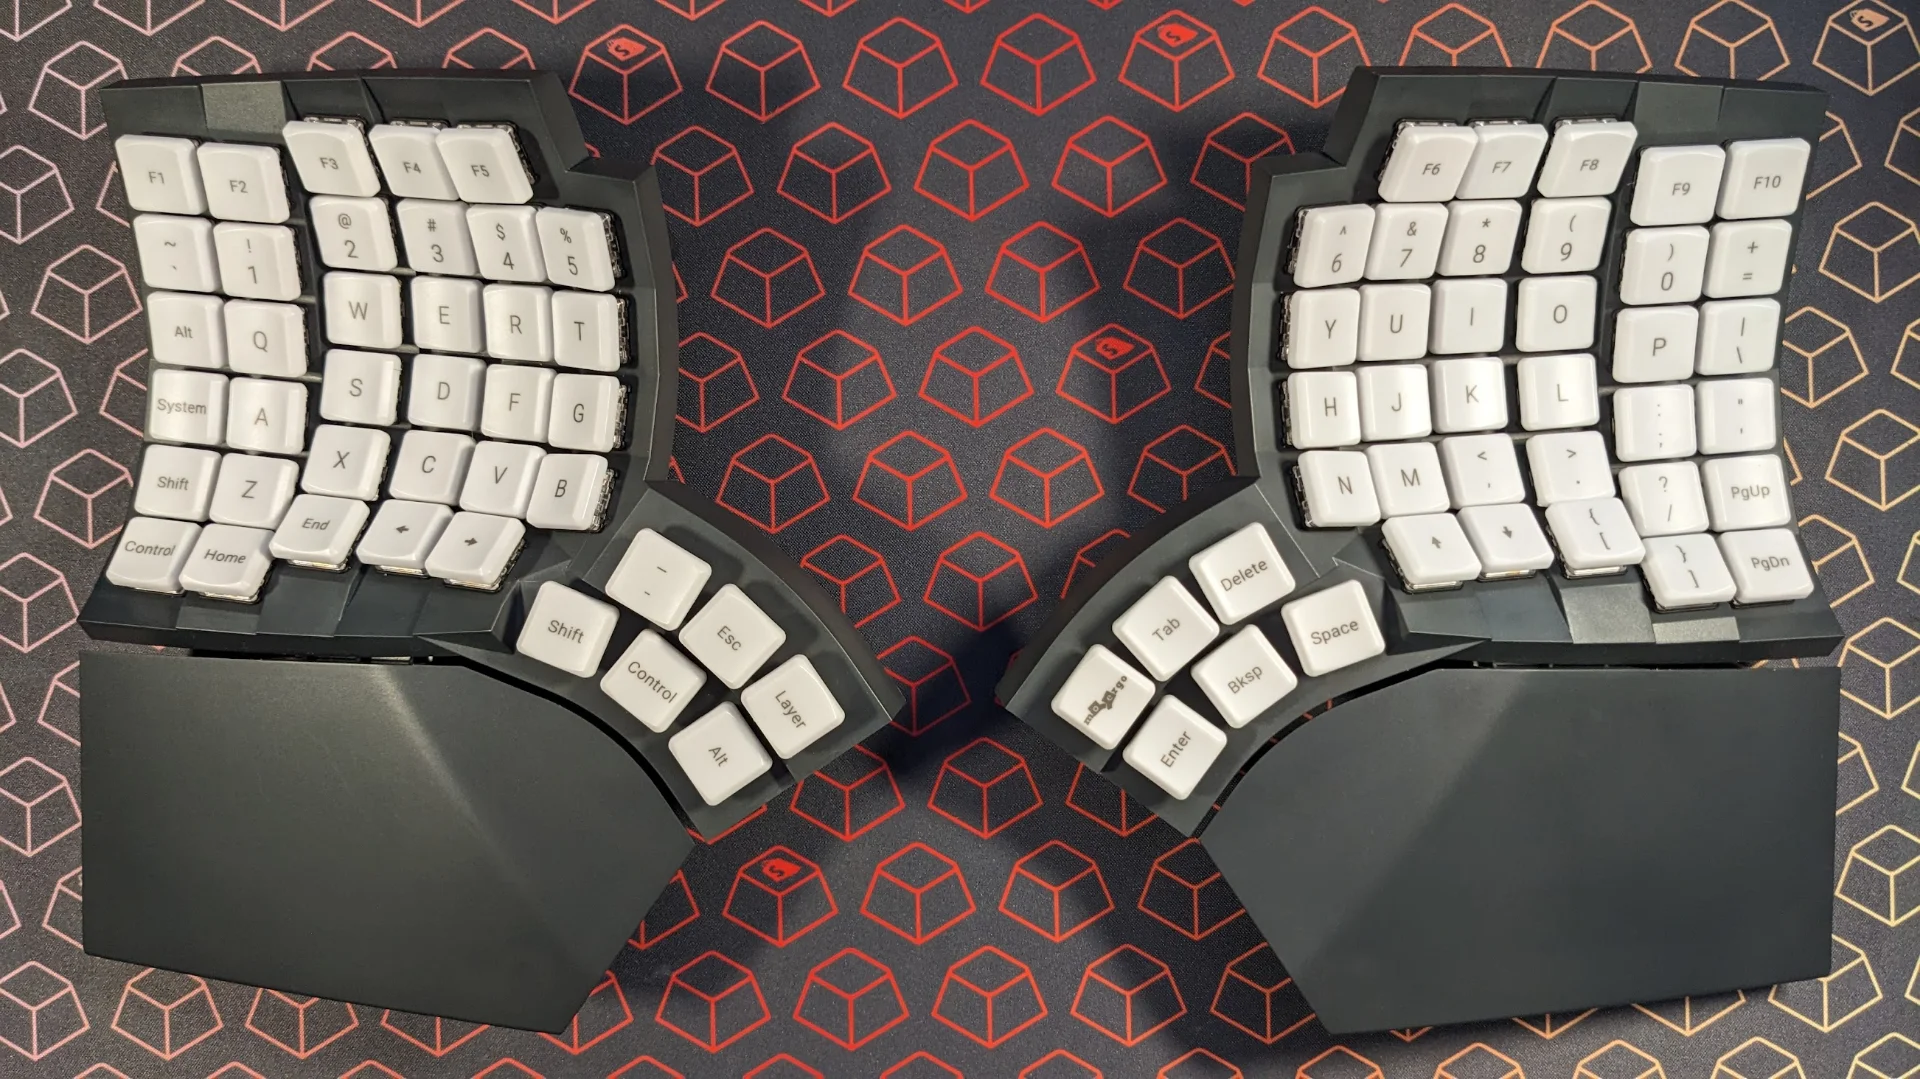 Preview image for First impressions of the MoErgo Glove80 ergonomic keyboard